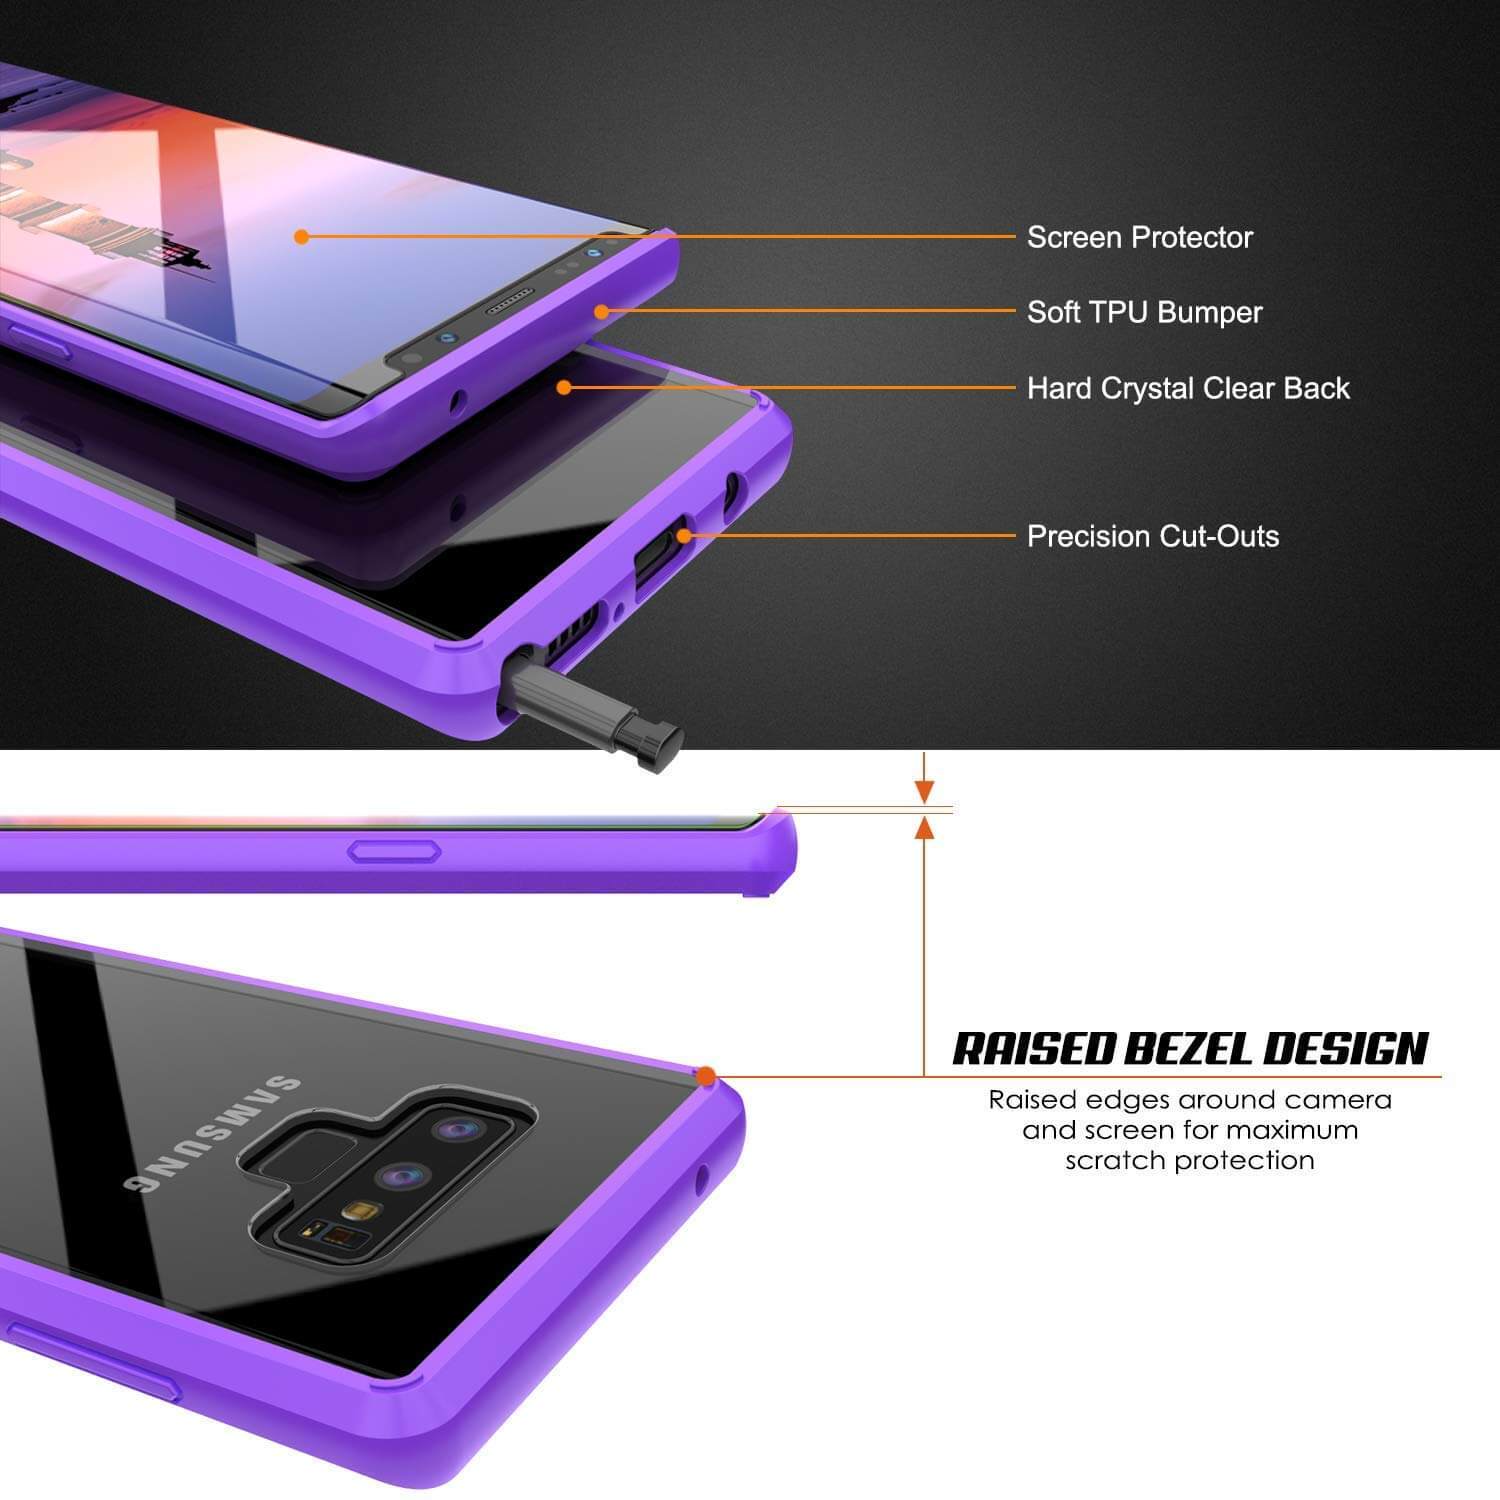 Galaxy Note 9 Case, PUNKcase [LUCID 2.0 Series] [Slim Fit] Armor Cover W/Integrated Anti-Shock System [Purple]